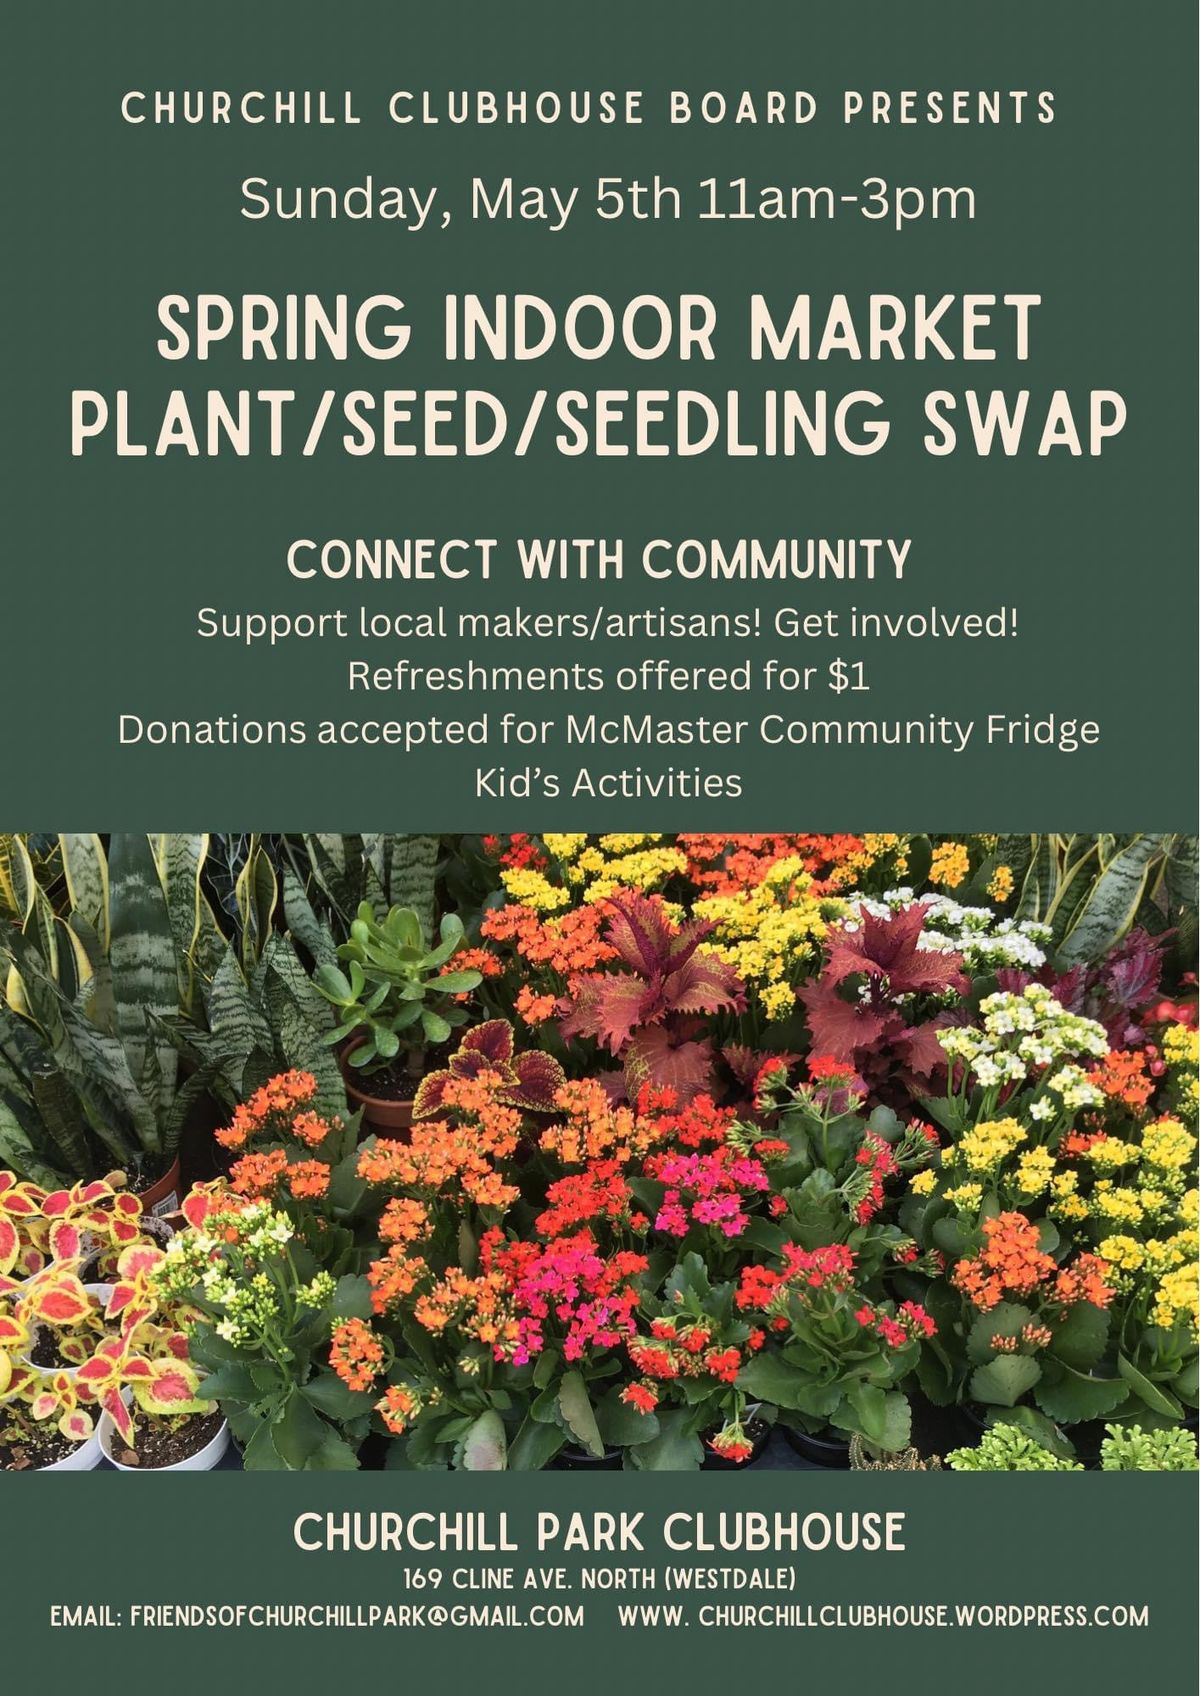 Spring Market and Seed\/ling Swap!